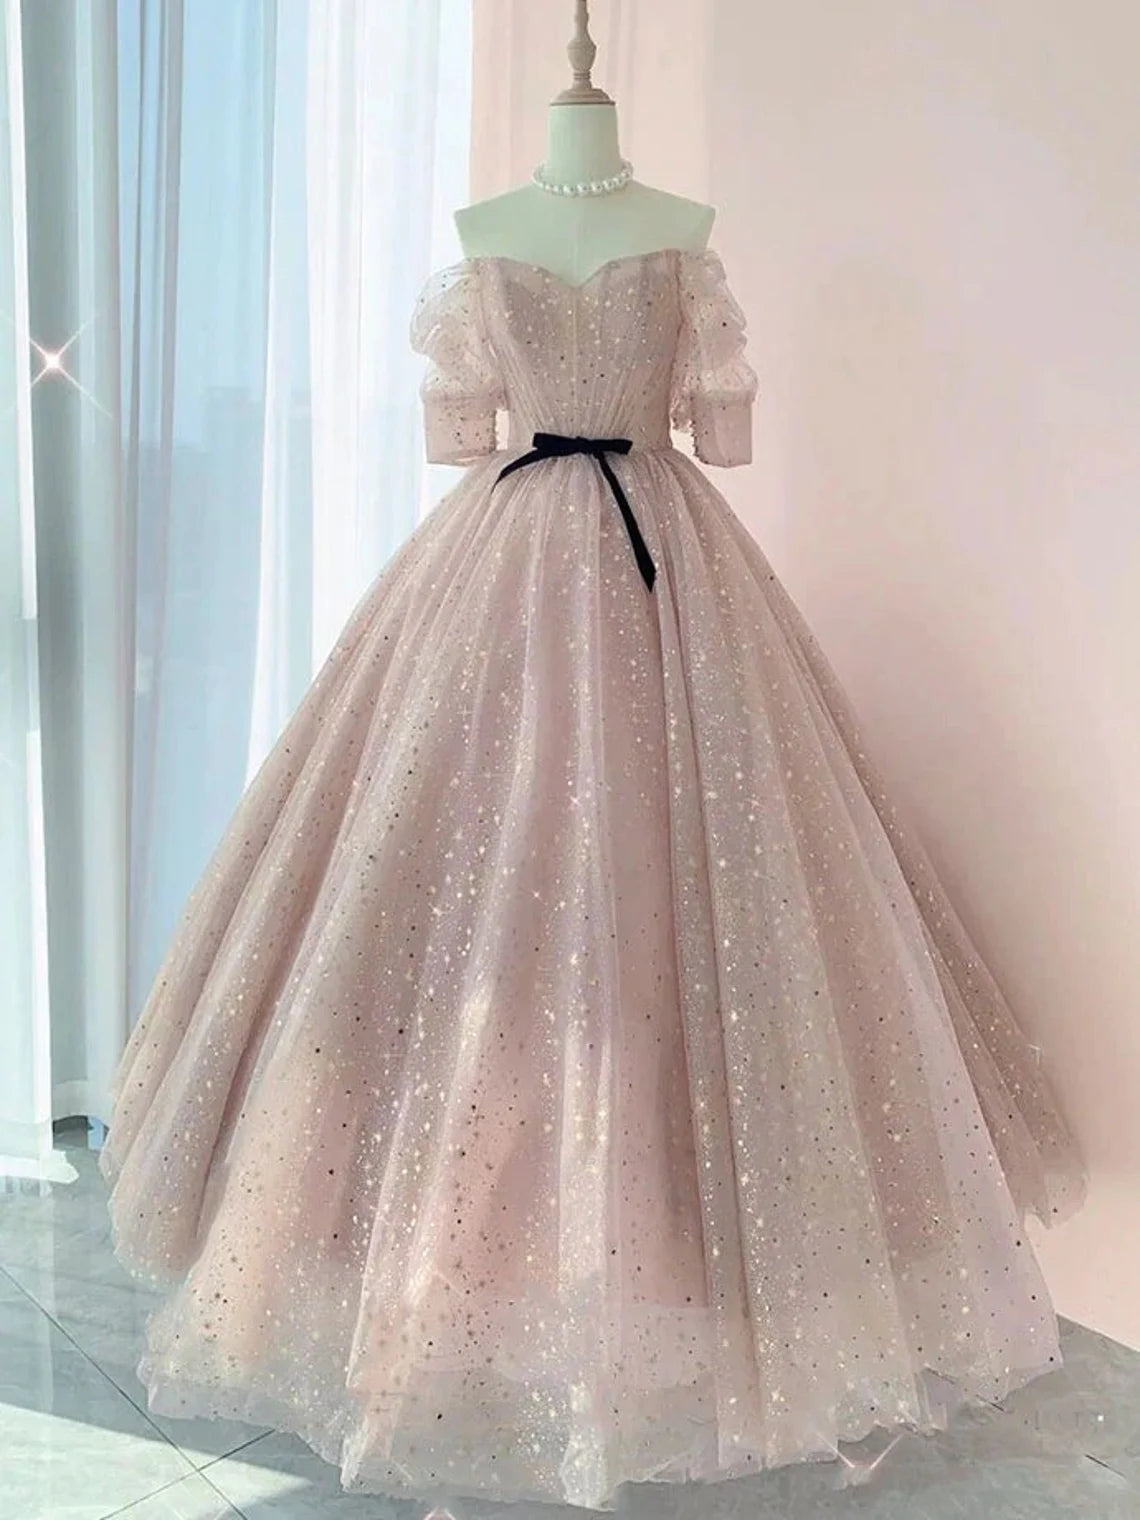 Pink Sweetheart-Neck Tulle Lace Half-Sleeve Prom Dresses For Black girls For Women, Pink Party Dress